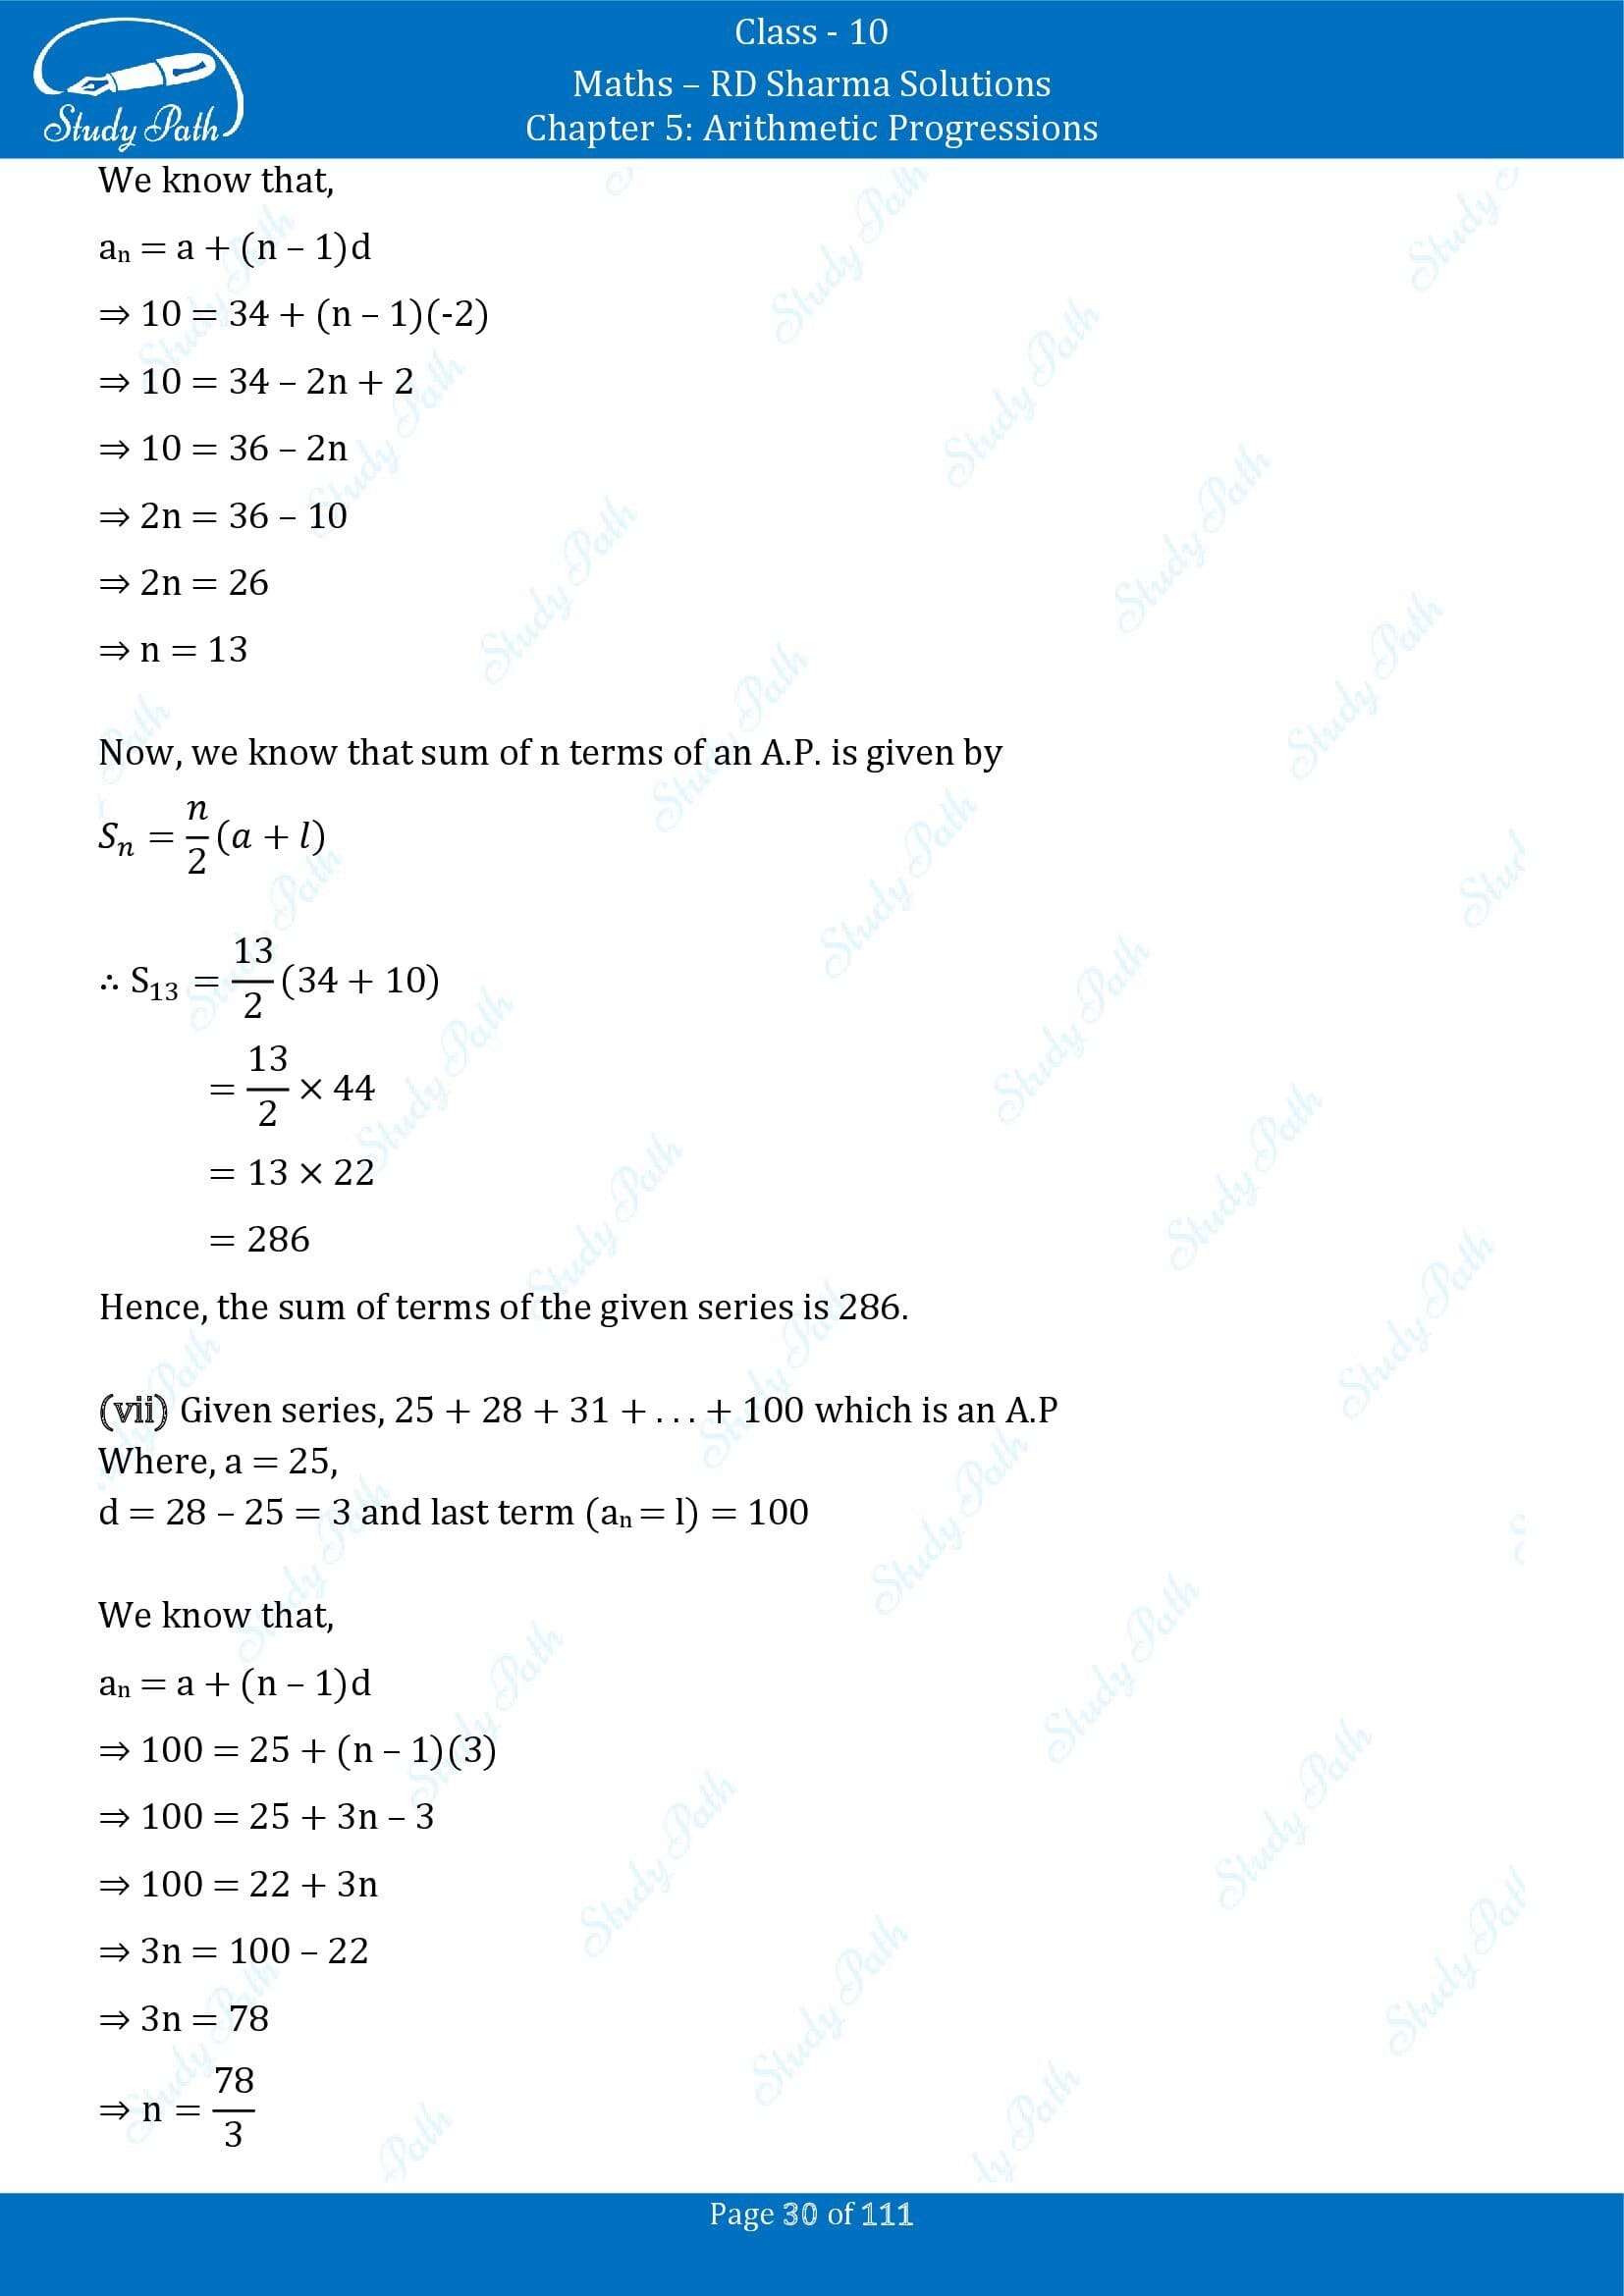 RD Sharma Solutions Class 10 Chapter 5 Arithmetic Progressions Exercise 5.6 00030